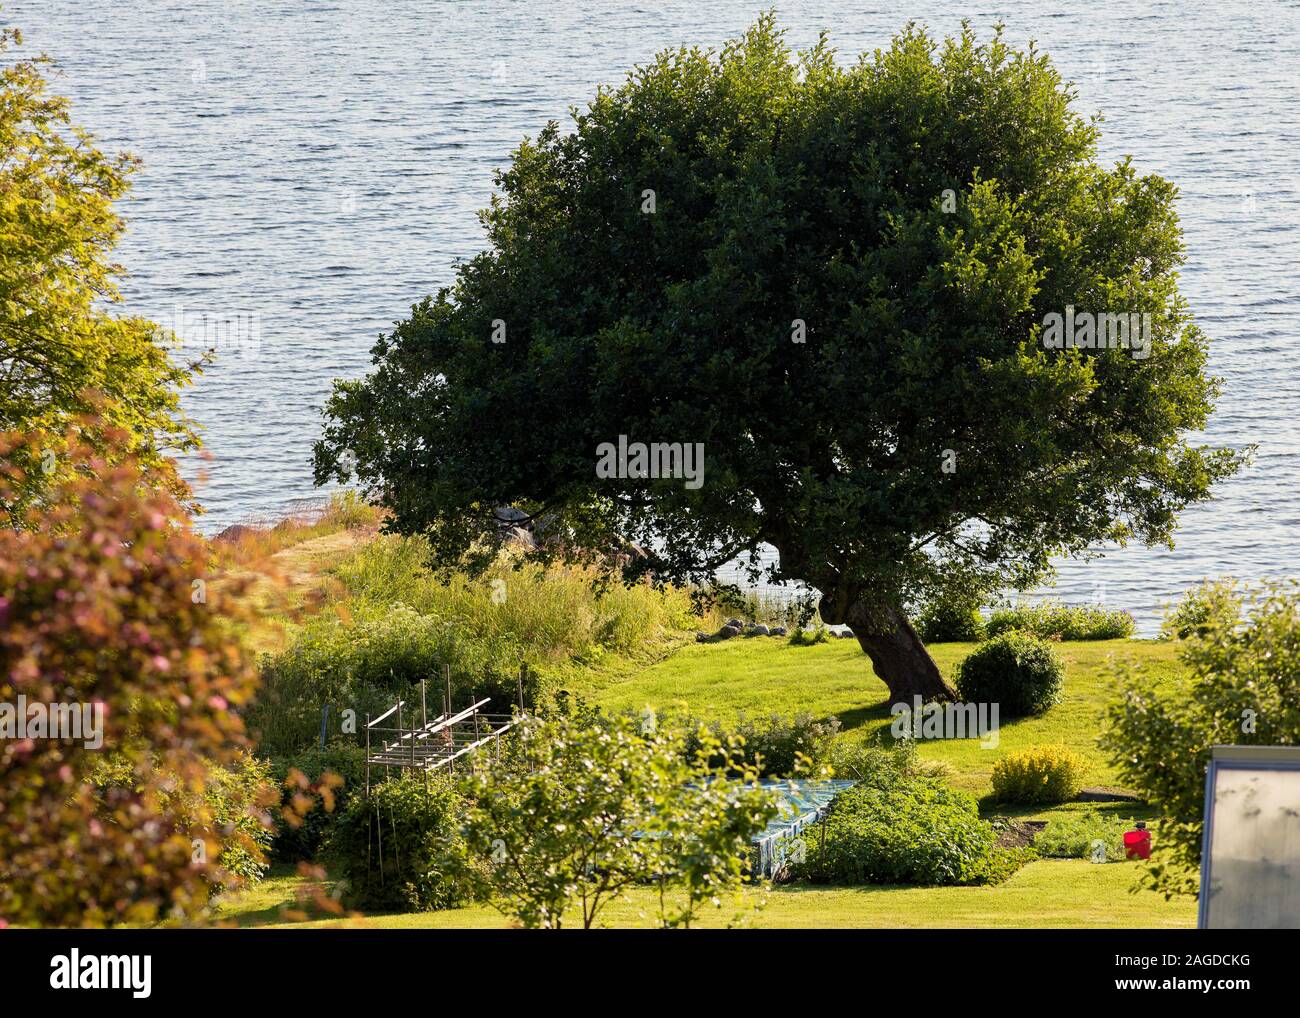 Rich, leaning tree in a summer coastal landscape, High Coast, Sweden Stock Photo